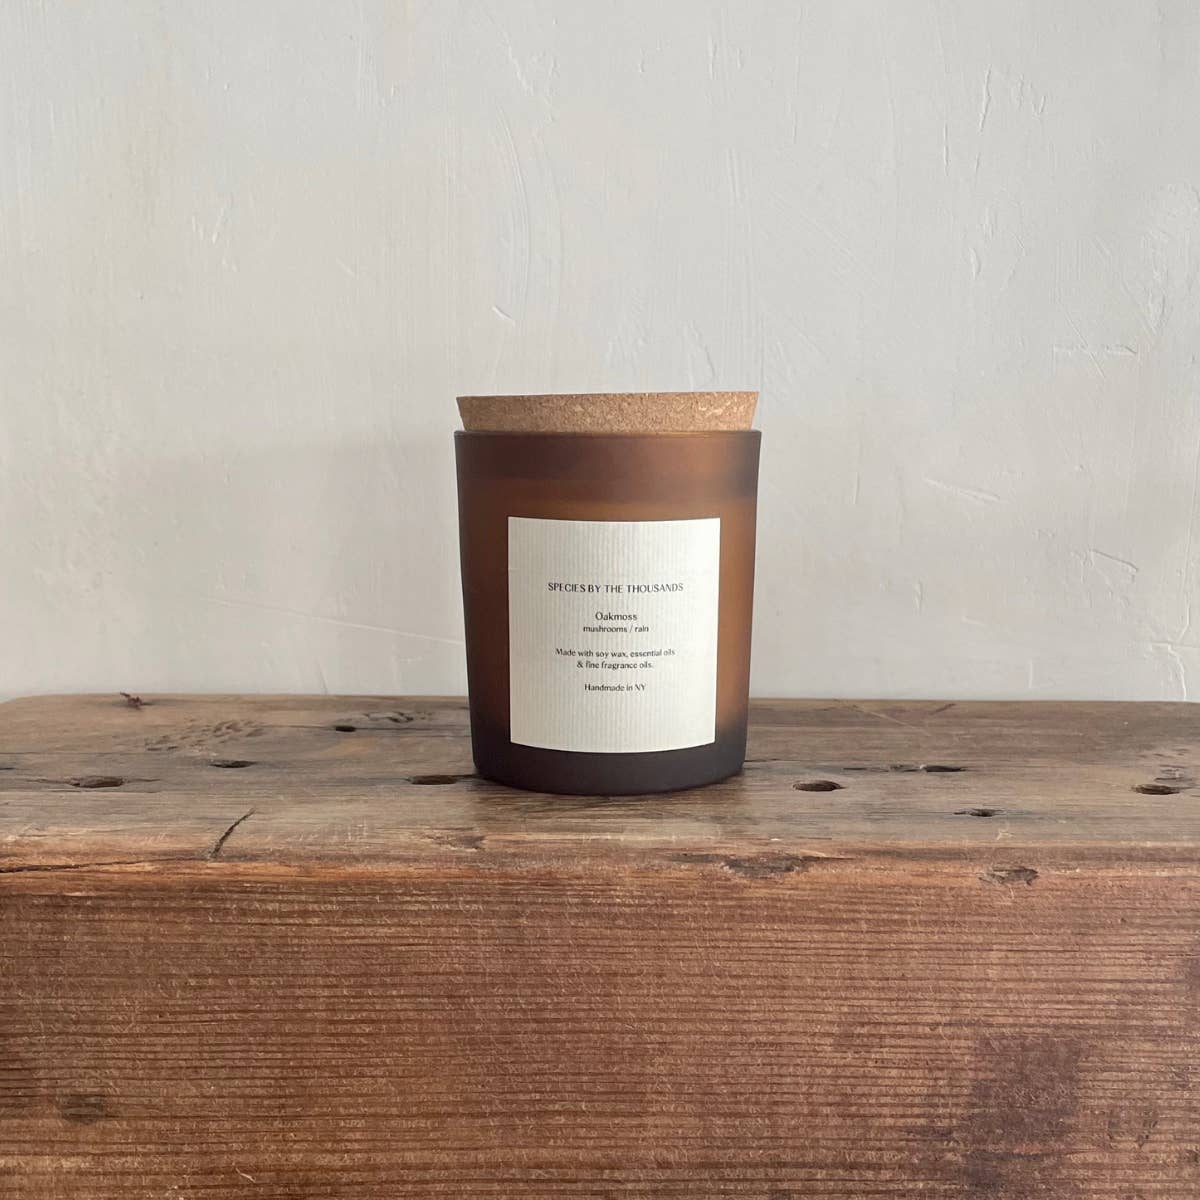 This hand poured candle is earthy and musky with damp mossy green notes and a touch of woodiness.